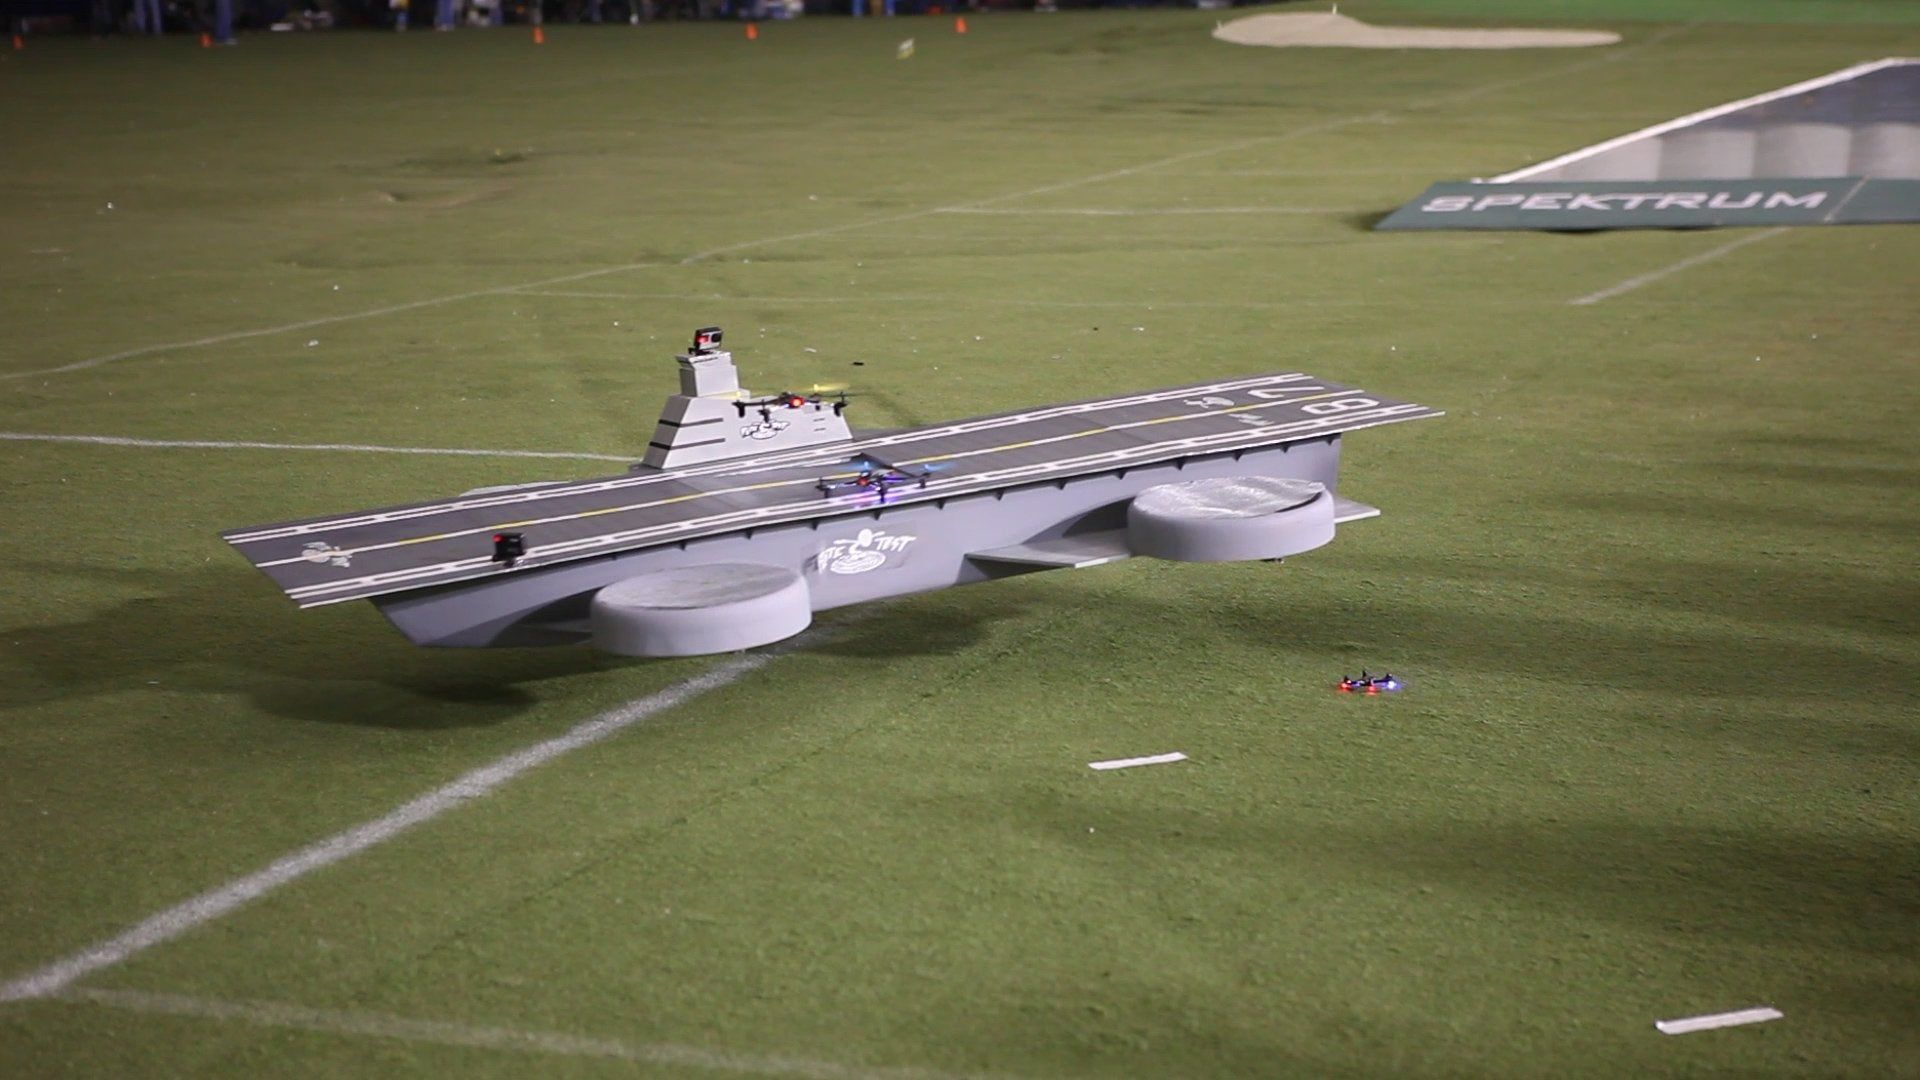 This Fanmade R C Helicarrier Actually Flies